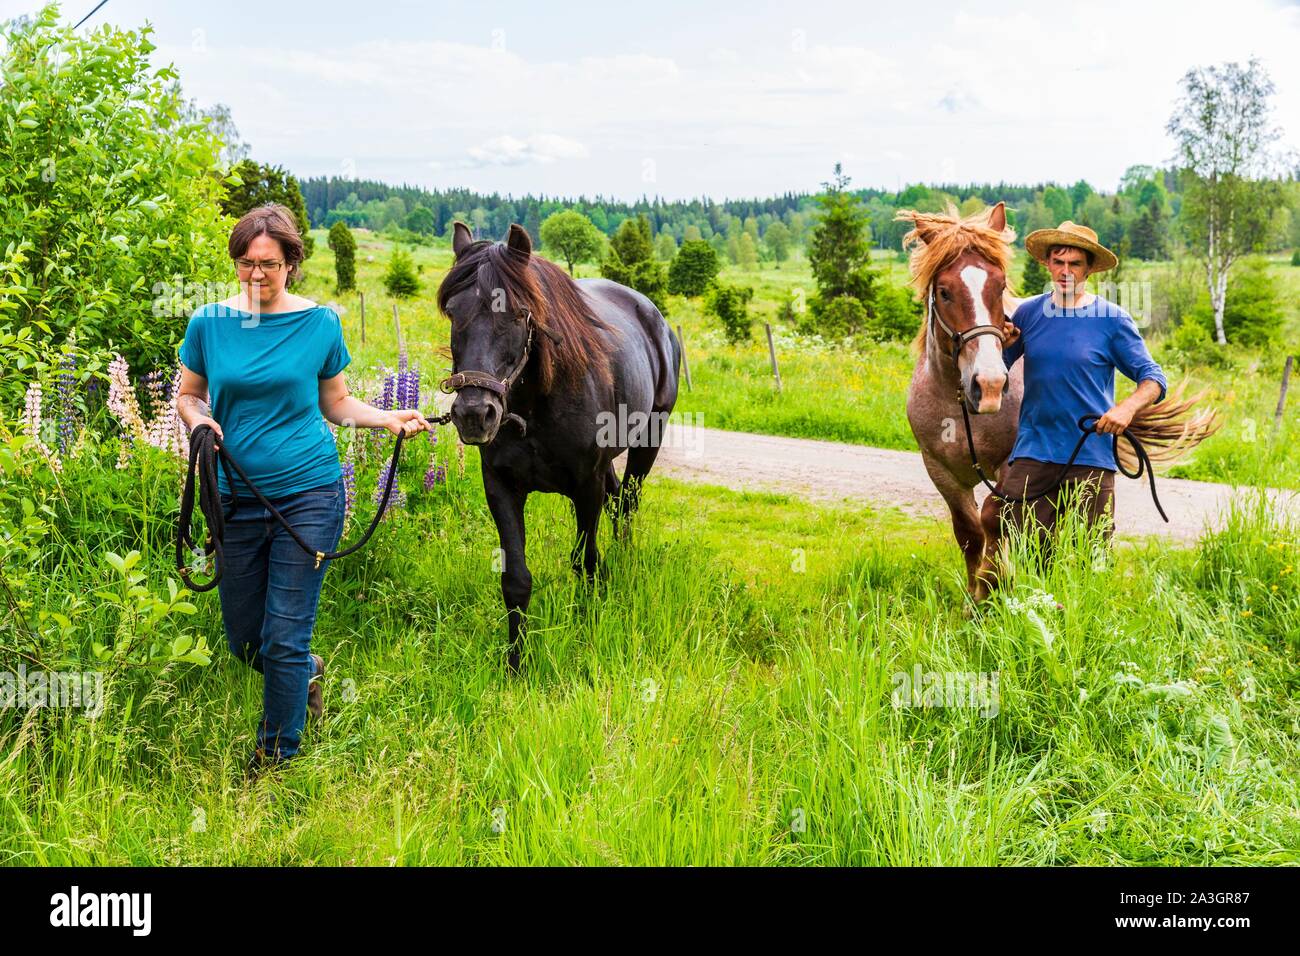 Sweden, County of Vastra Gotaland, Hokerum, Ulricehamn hamlet, Rochat family report, Pierre and Sonia change the park horses Rudolph and Max 32yrs Stock Photo